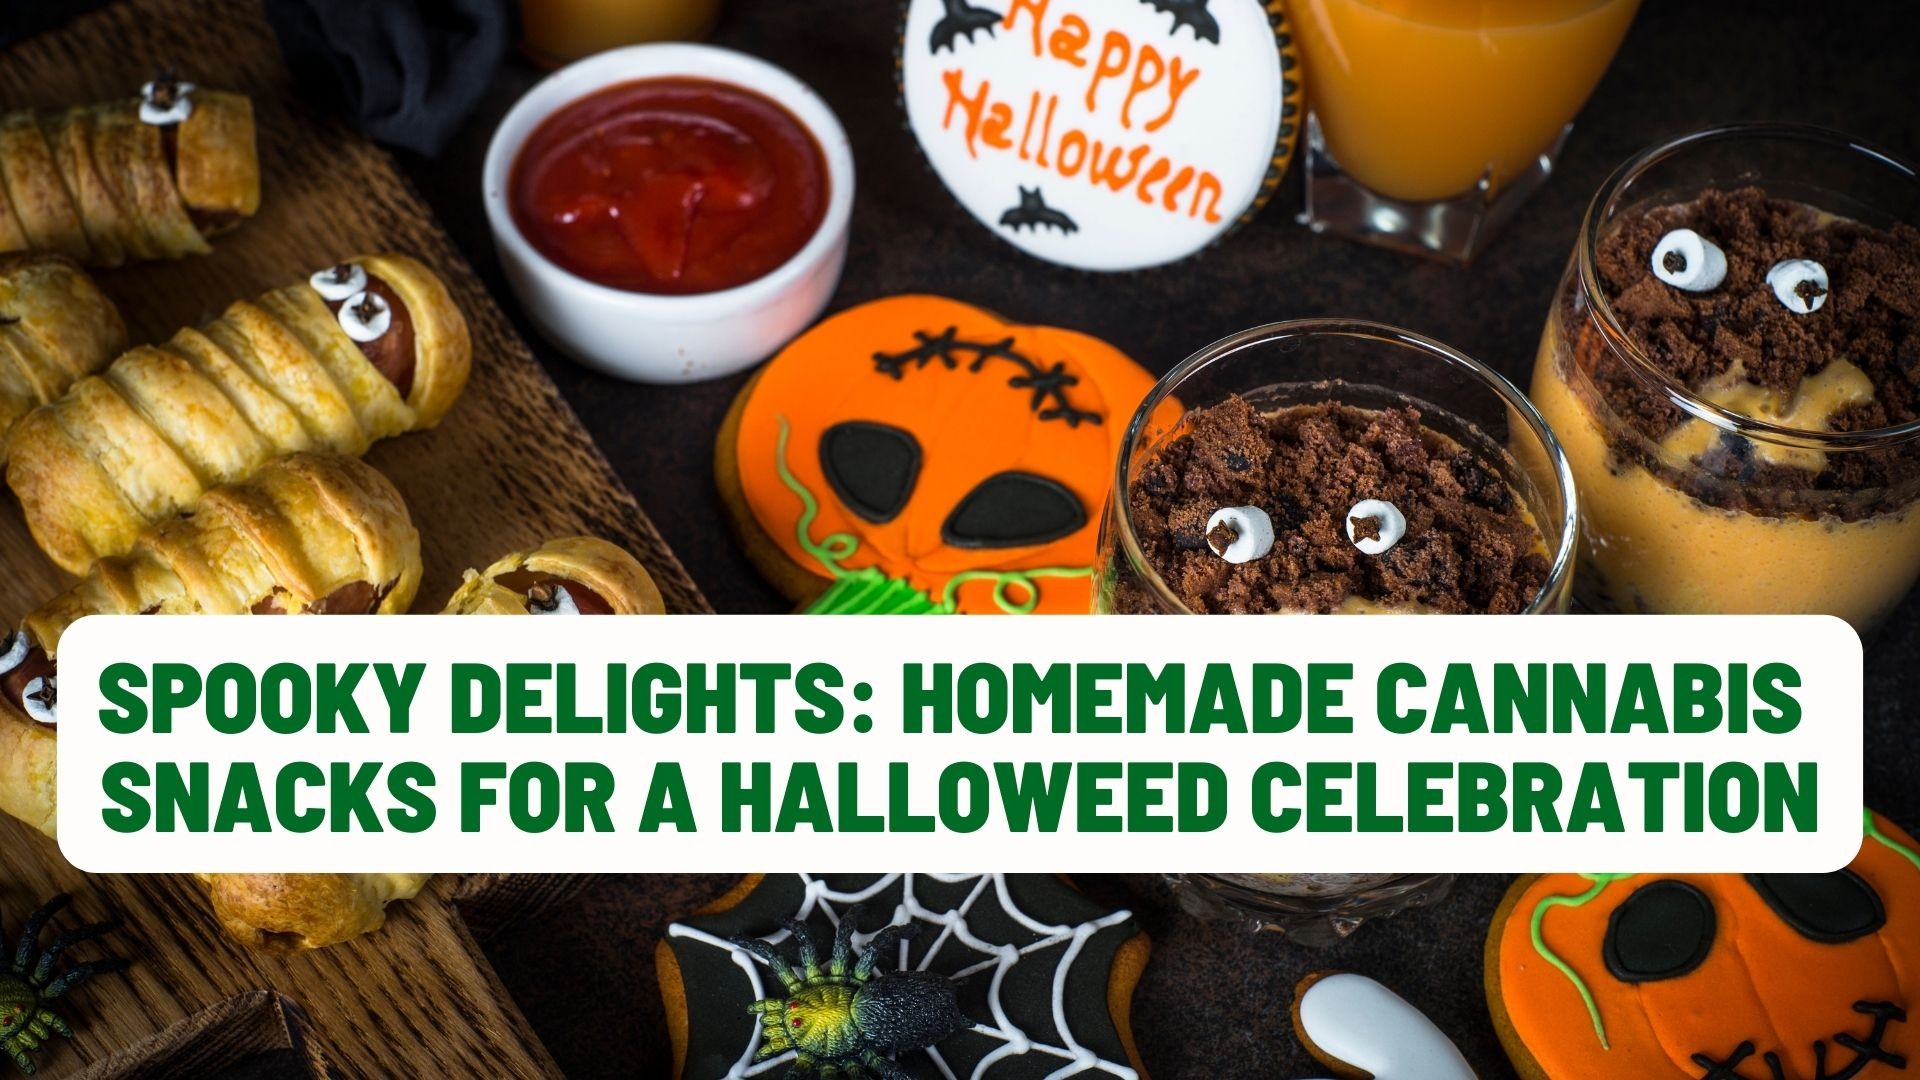 Spooky Delights: Homemade Cannabis Snacks for a Halloweed Celebration